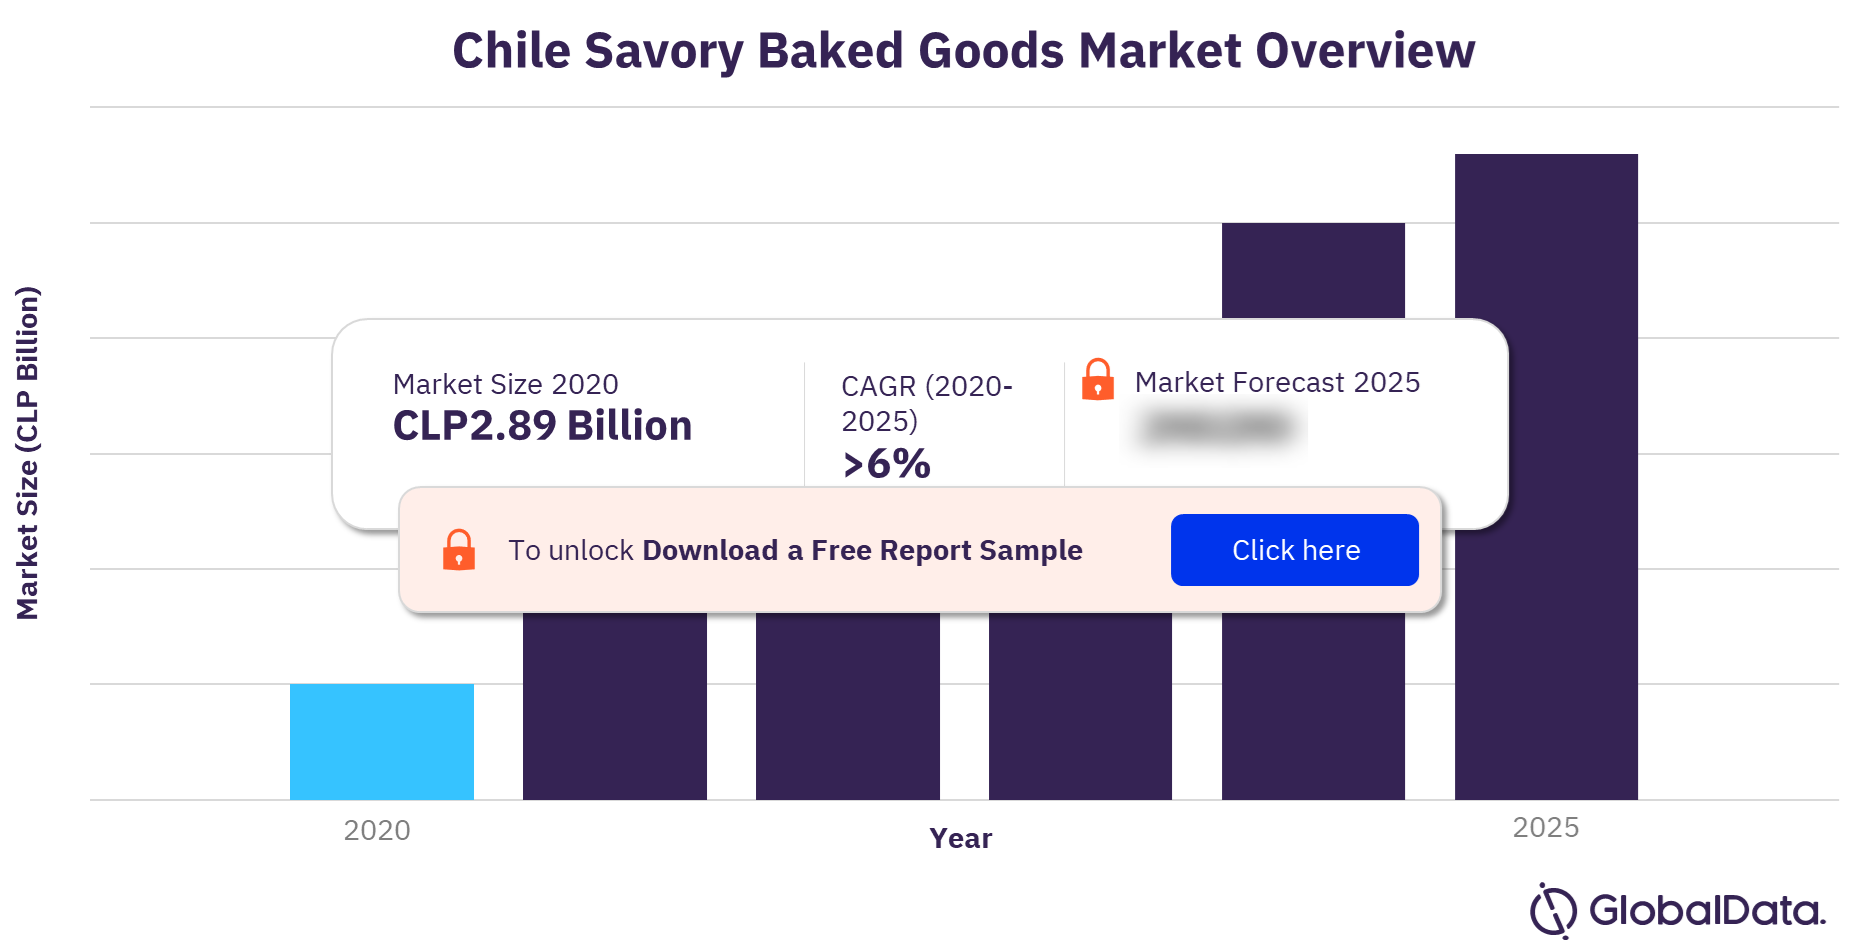 Chile savory baked goods market outlook